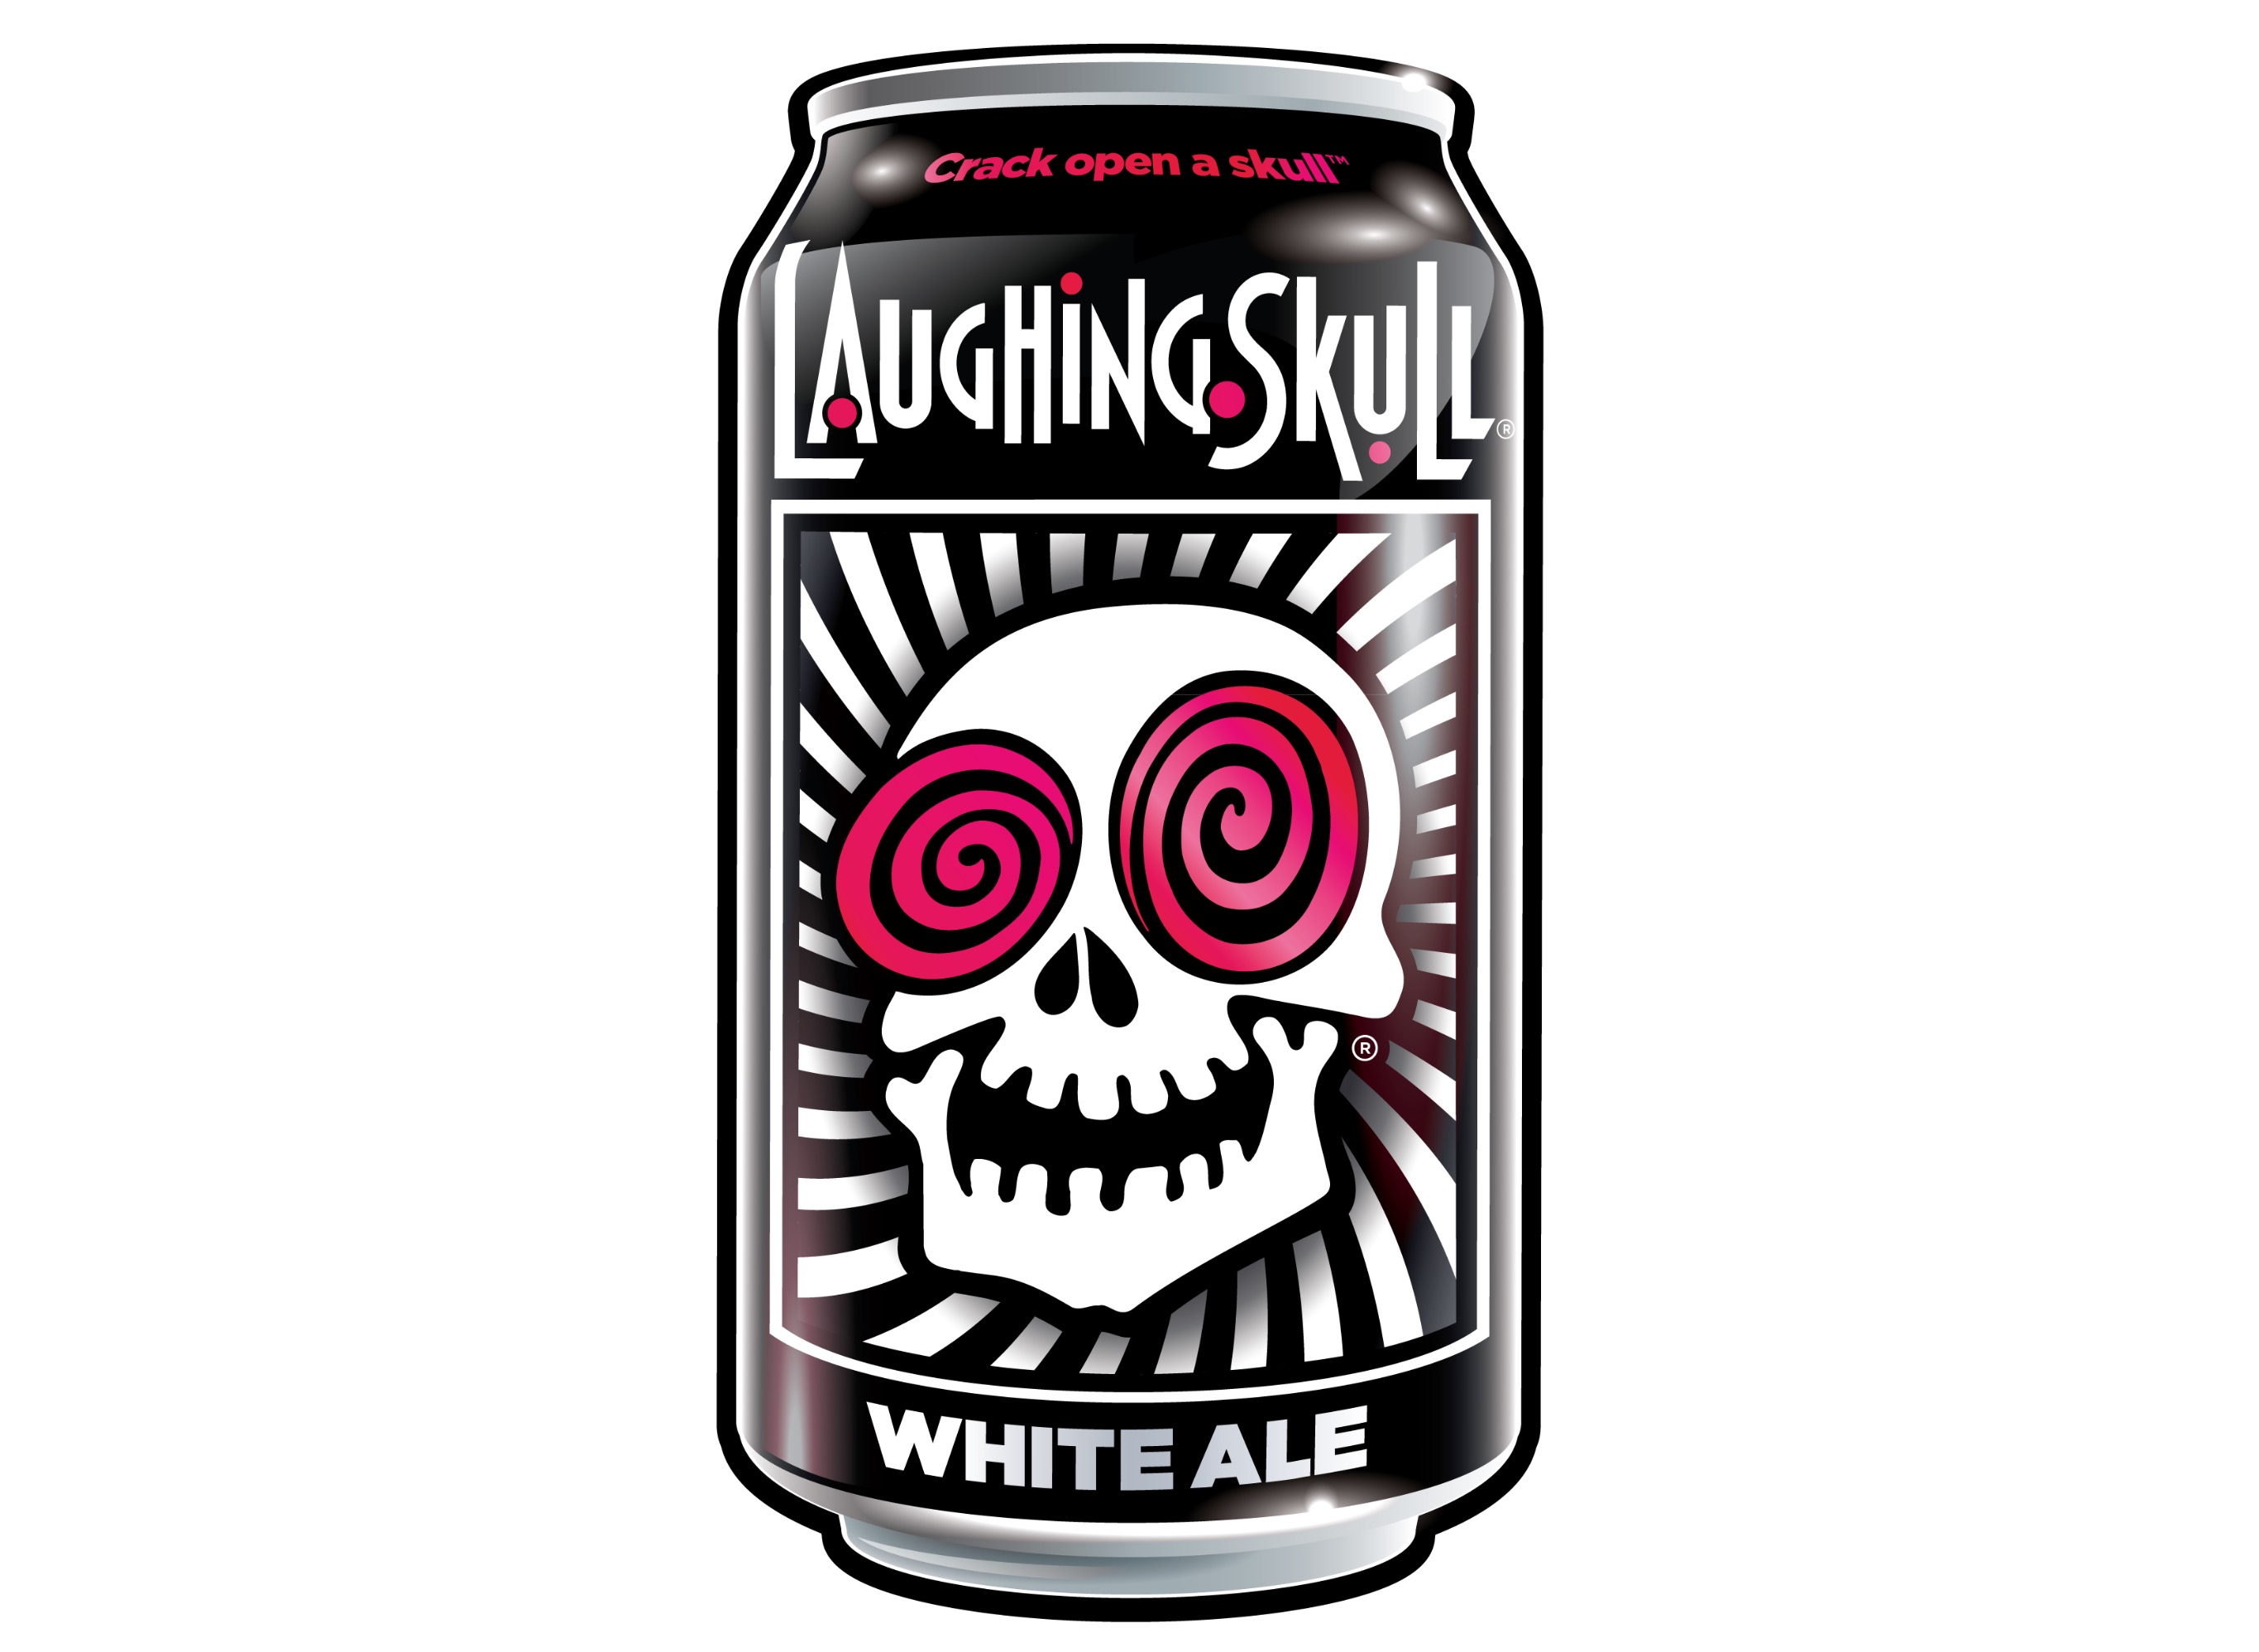 Laughing Skull White Ale